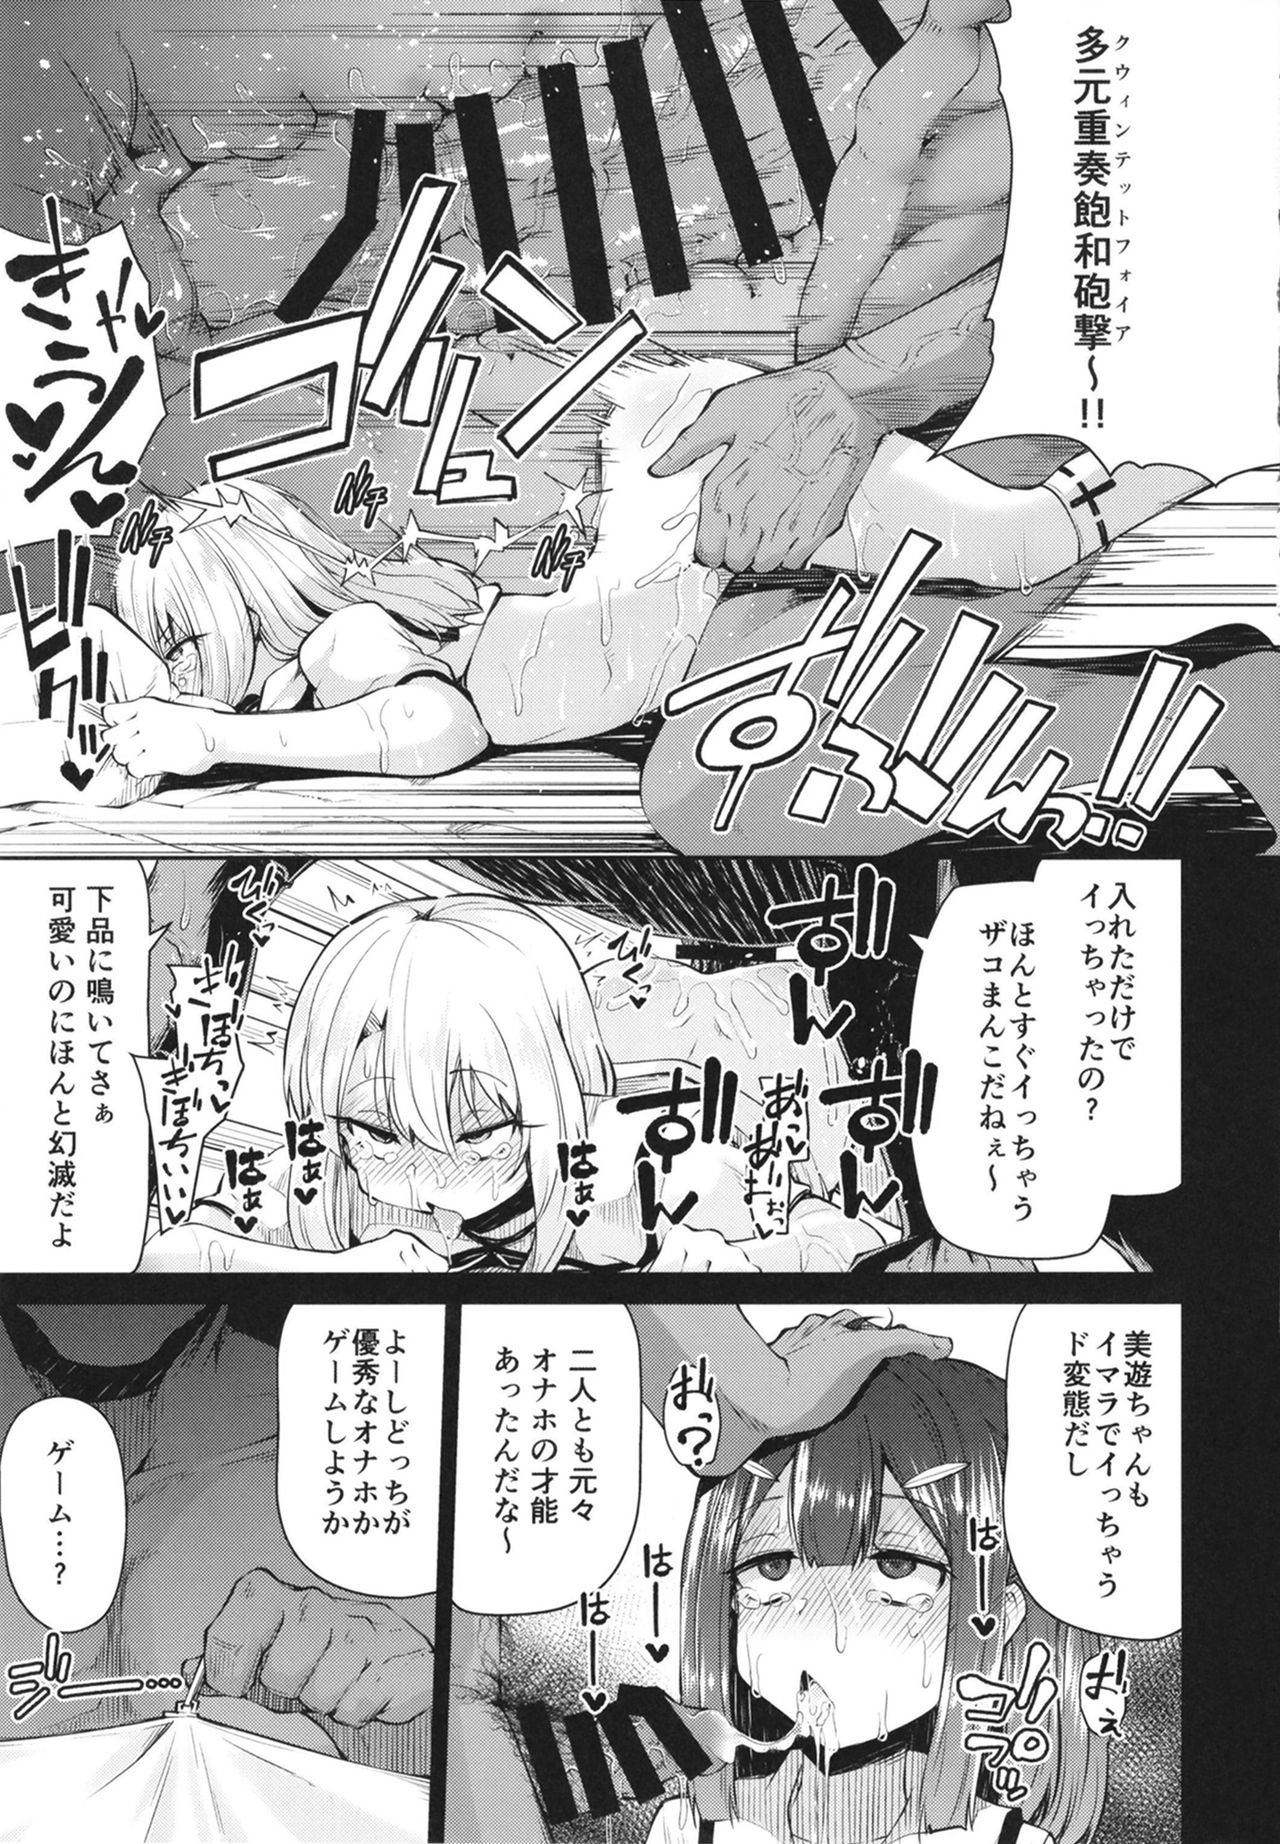 [Kitsuneya (Leafy)] Mahou Shoujo to Shiawase Game - Magical Girl and Happiness Game (Fate/Grand Order, Fate/kaleid liner Prisma Illya) [Digital] page 13 full